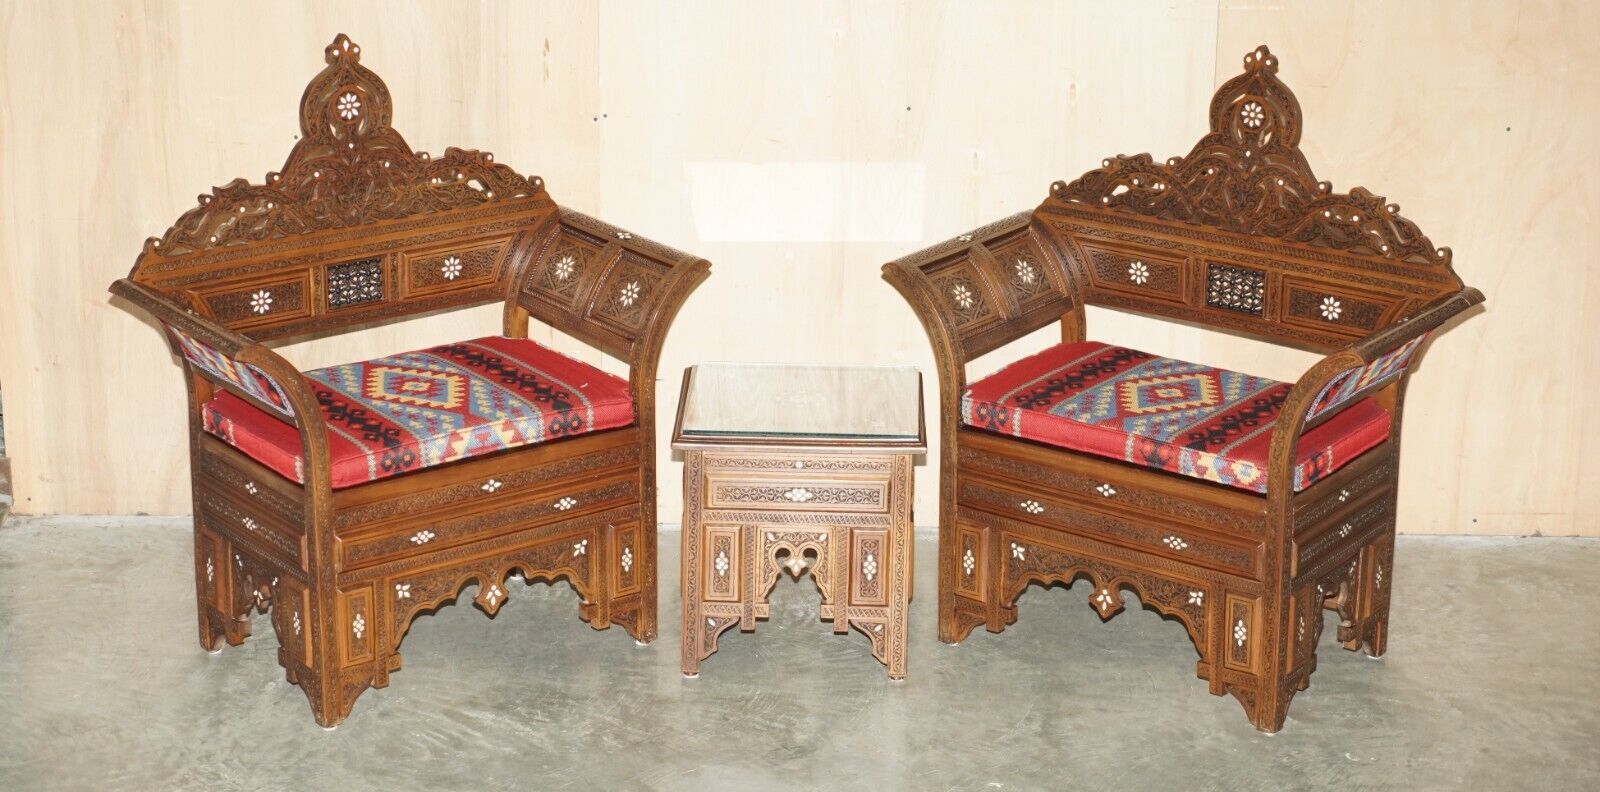 PAIR OF KILIM & MOTHER OF PEARL INLAID MOORISH MOROCCAN SYRIAN ARMCHAIRS & TABLE